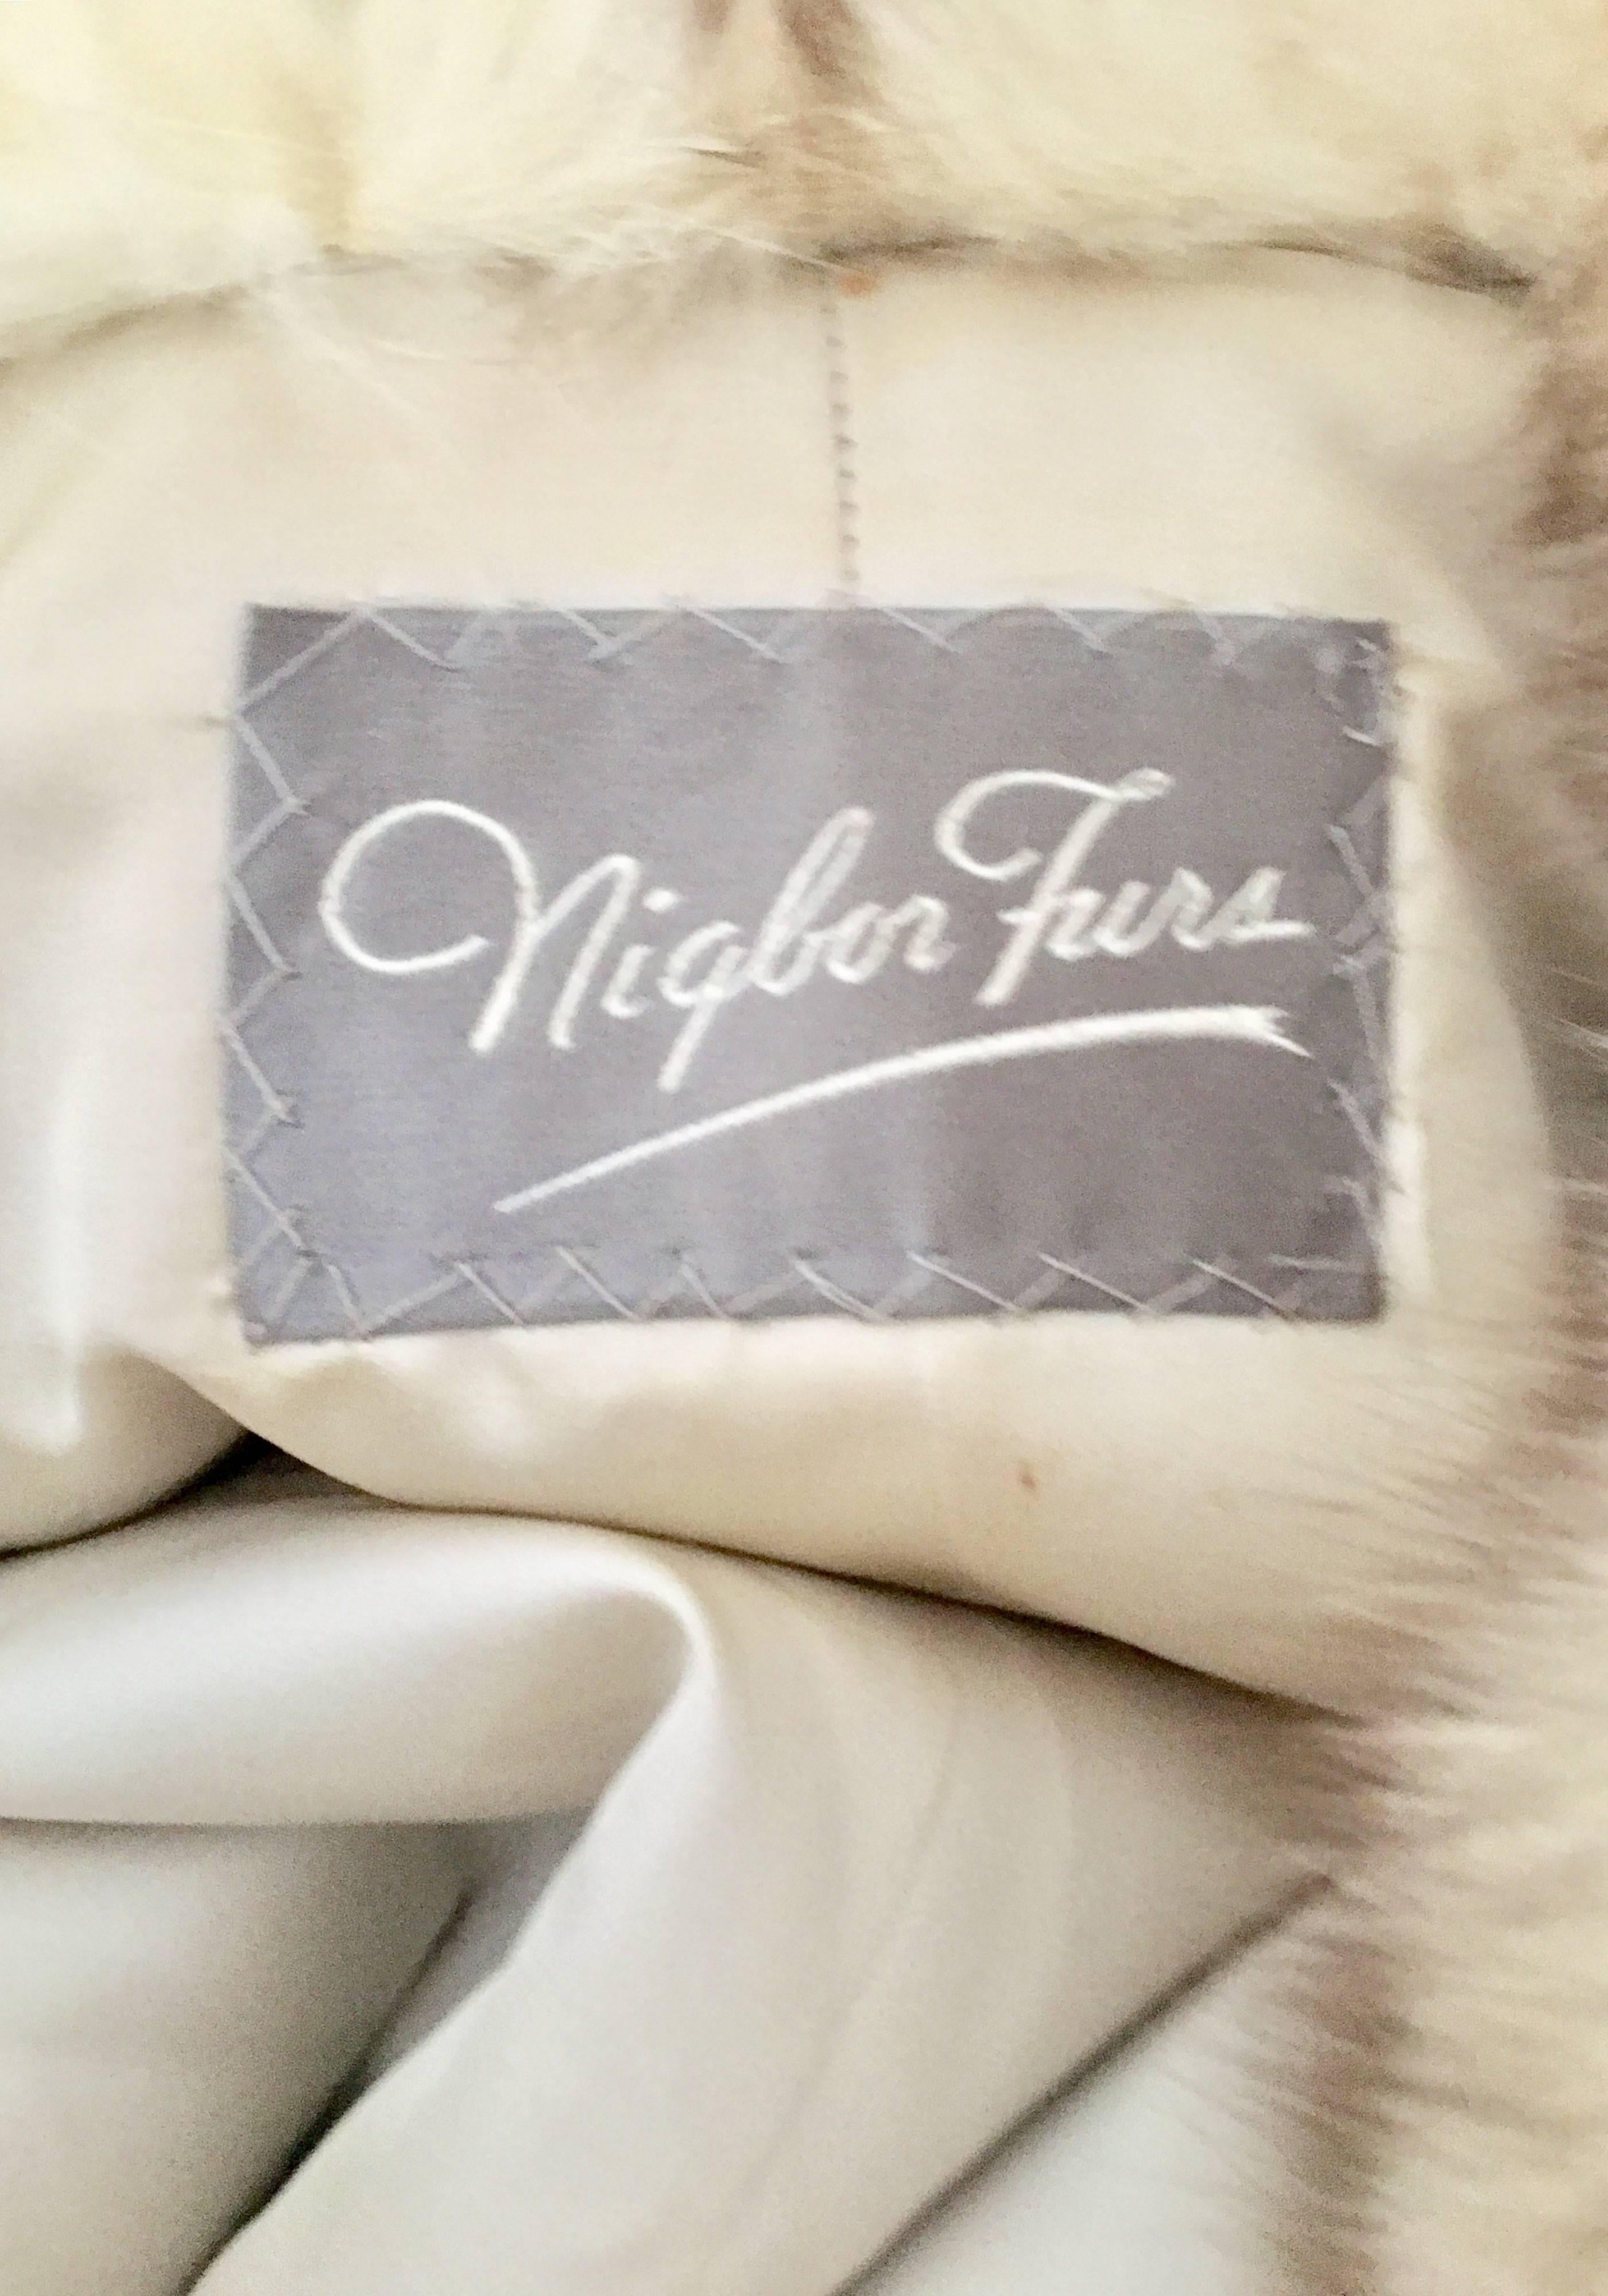 Silver Fox Fur and Leather Panel Vintage Coat By Nigbor Furs 2